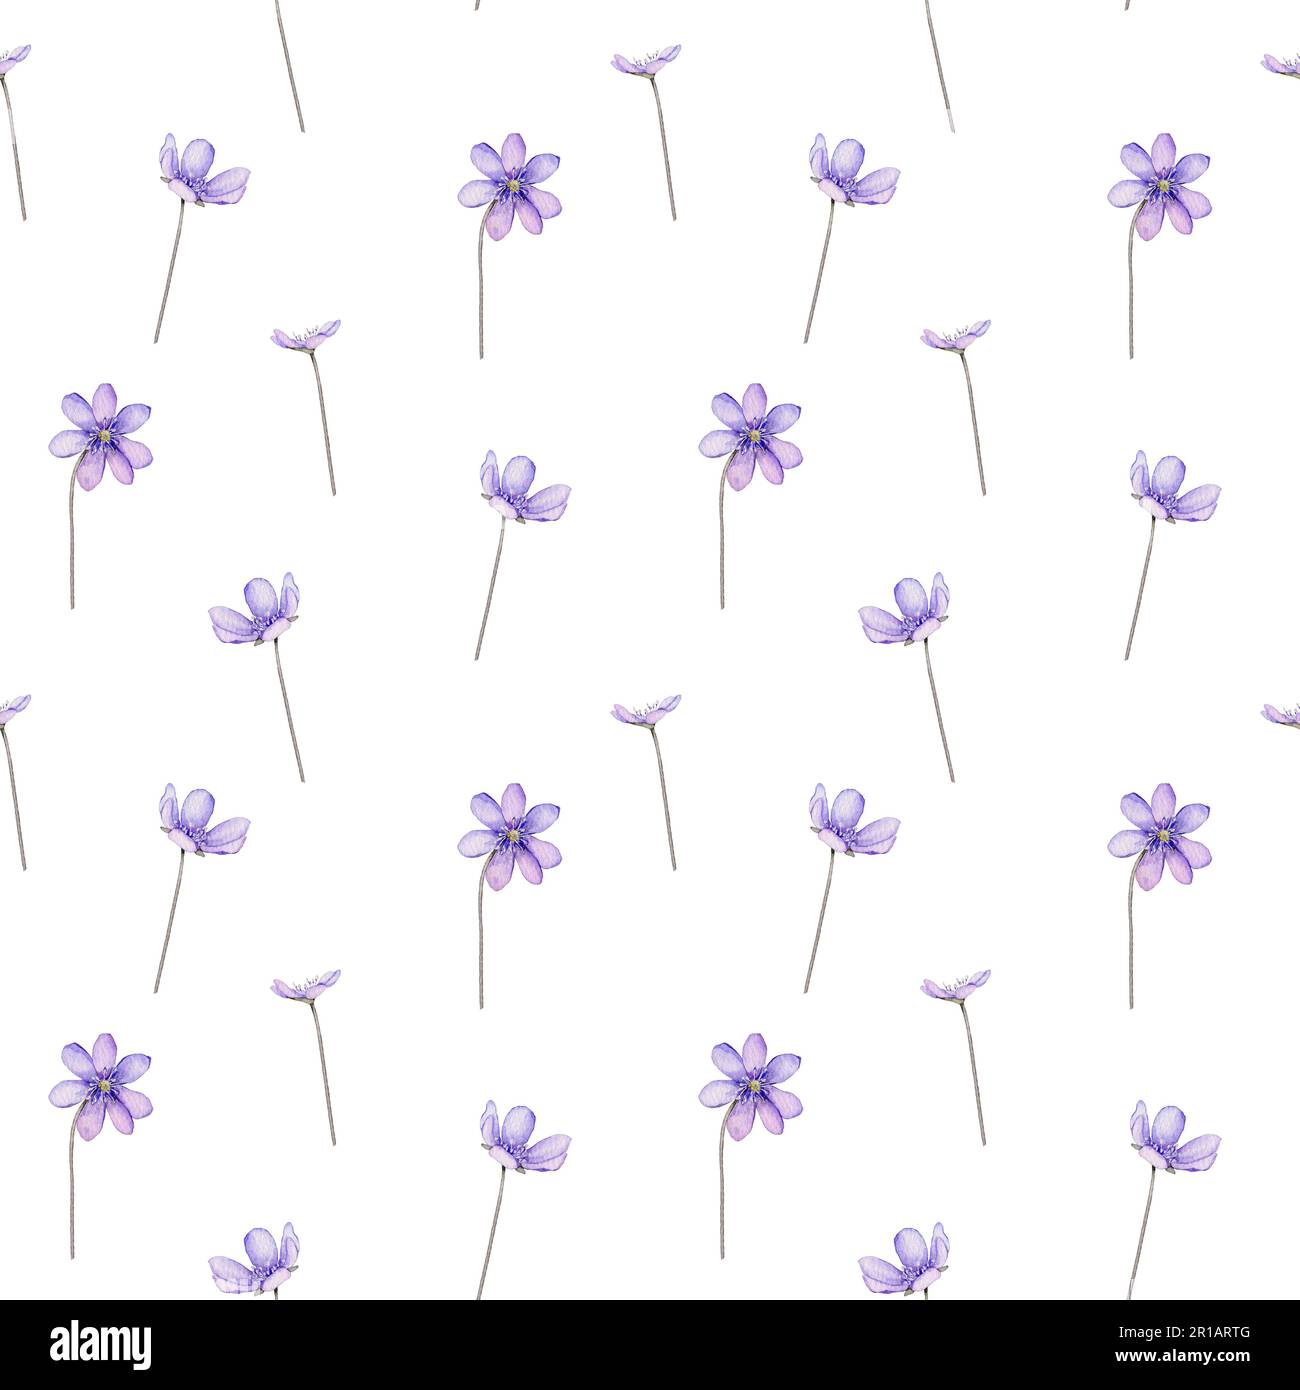 Seamless pattern watercolor spring flowers. Scilla. Coppice, hepatica - first spring flowers. Illustration of delicate lilac flowers. Primroses, the Stock Photo